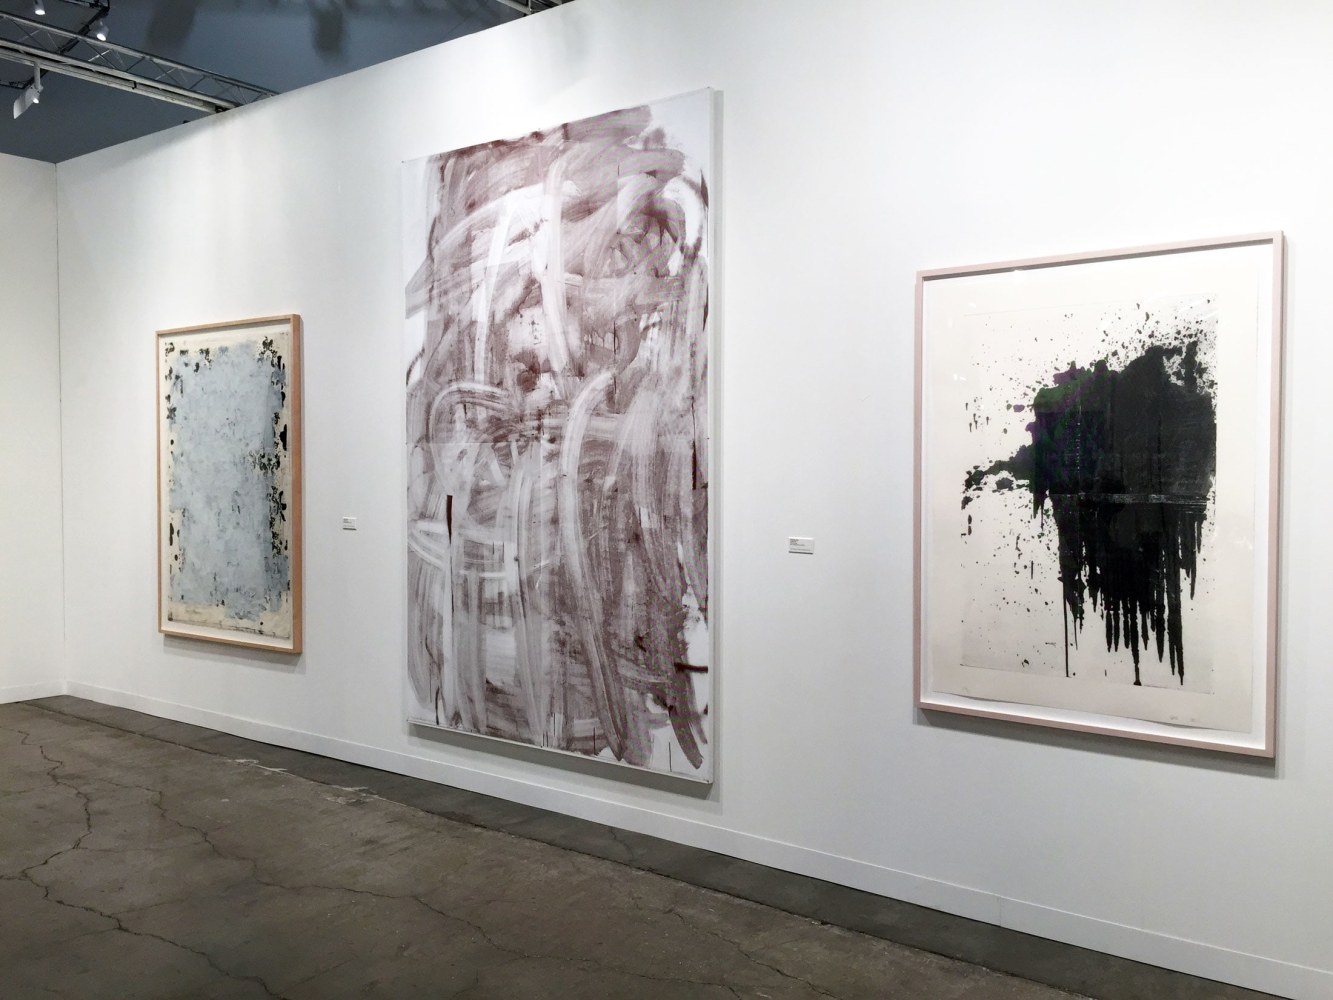 Luhring Augustine&amp;nbsp;

Art Basel Miami Beach&amp;nbsp;

Installation view&amp;nbsp;

2014

Pictured: Christopher Wool